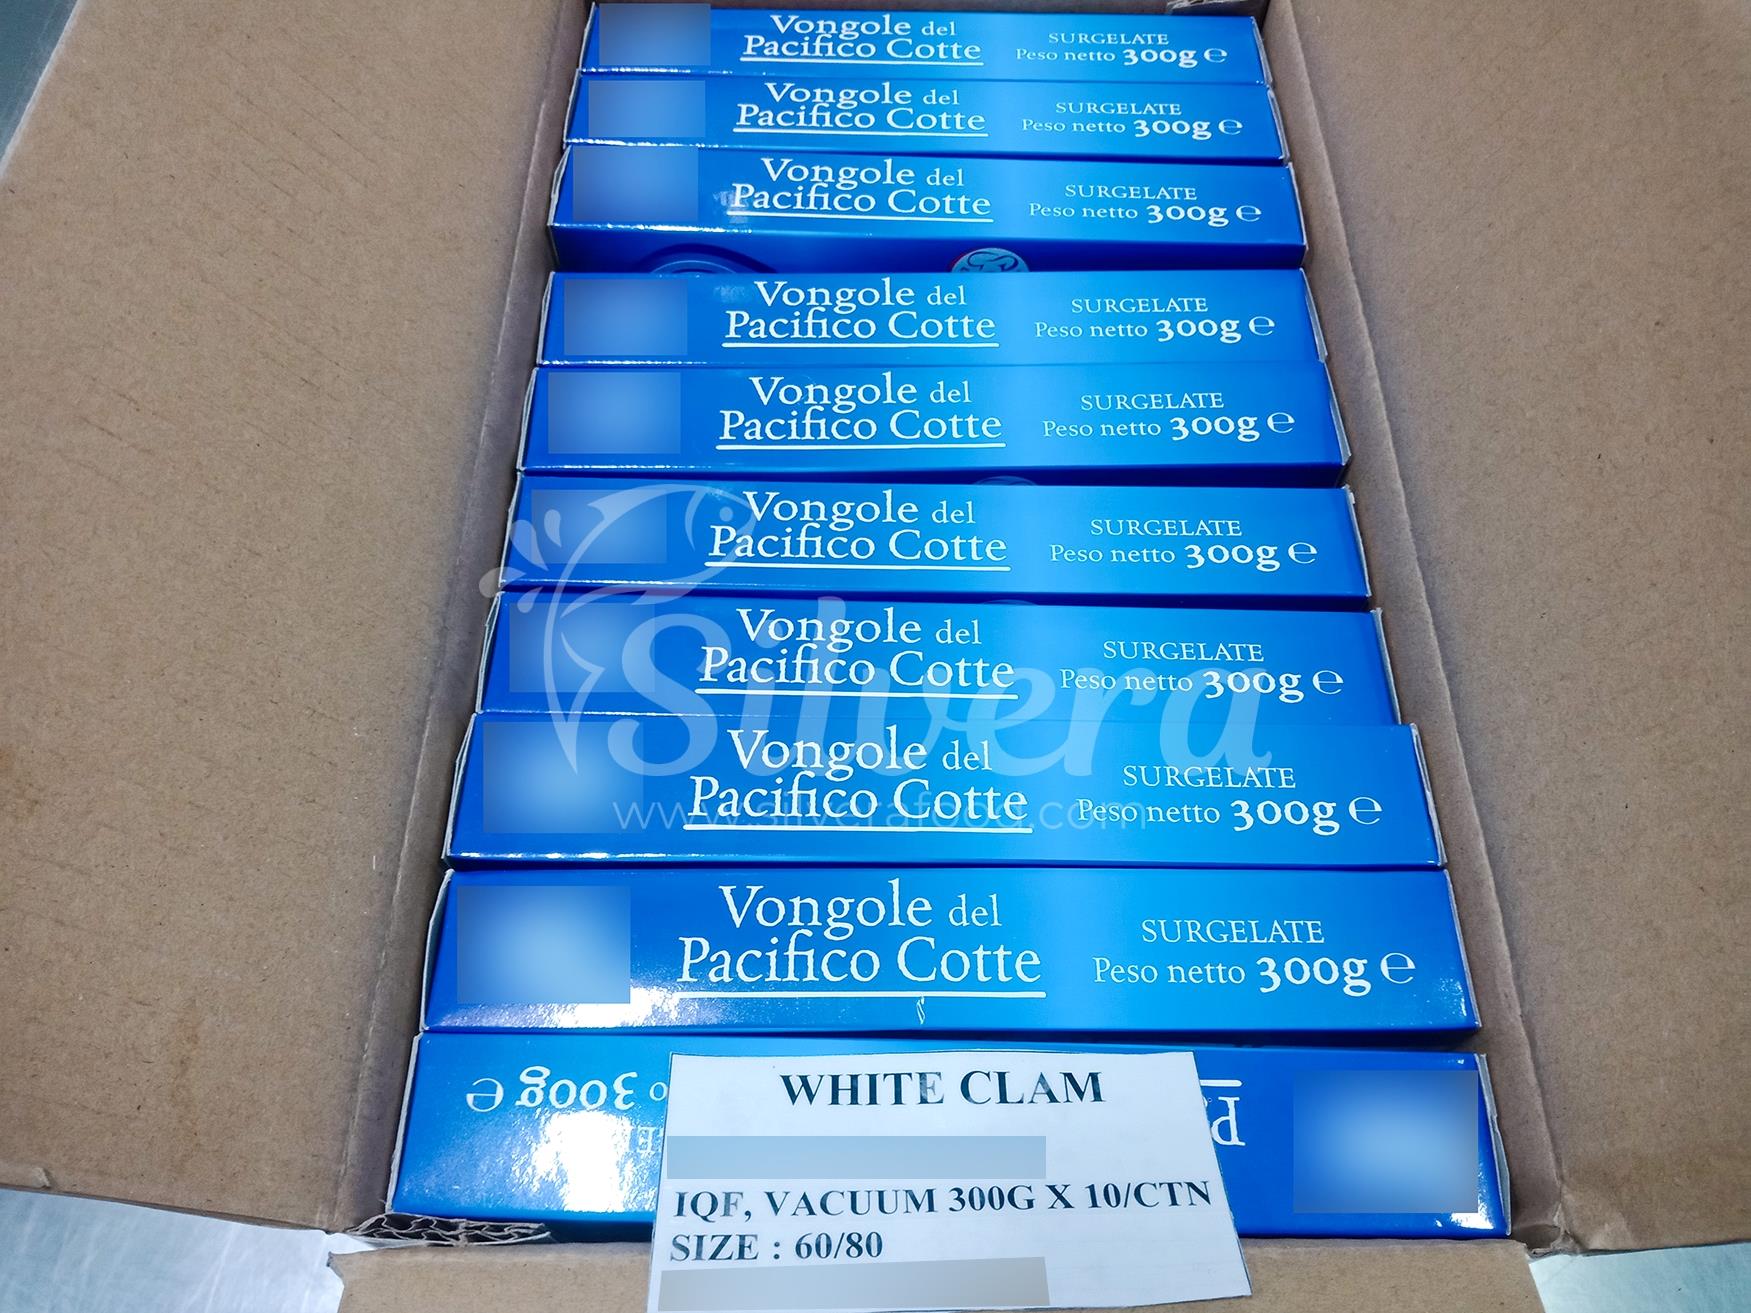 Retail printed boxes of fully cooked whole white clams